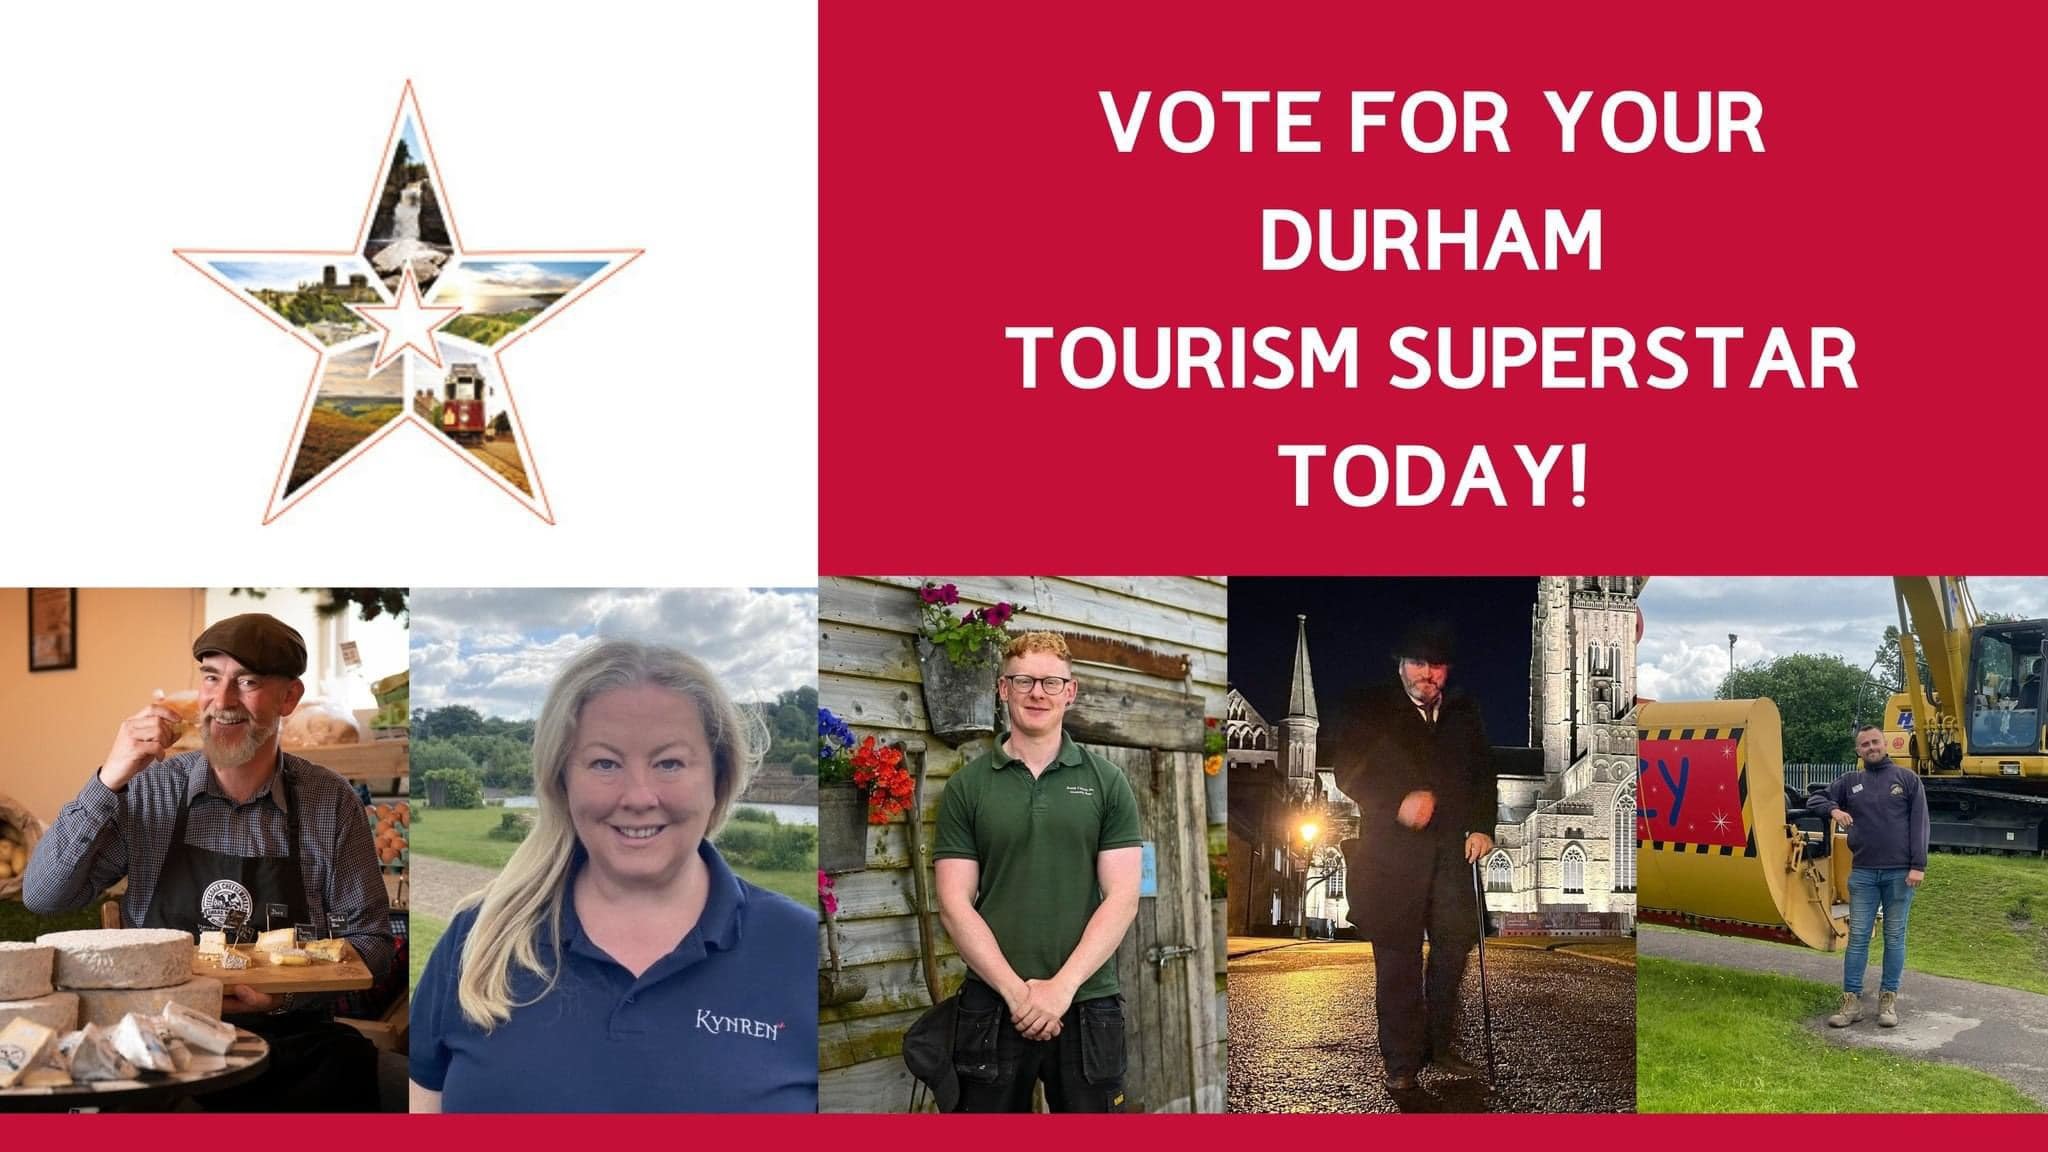 Vote for Jonathan as your Durham Tourism Superstar!